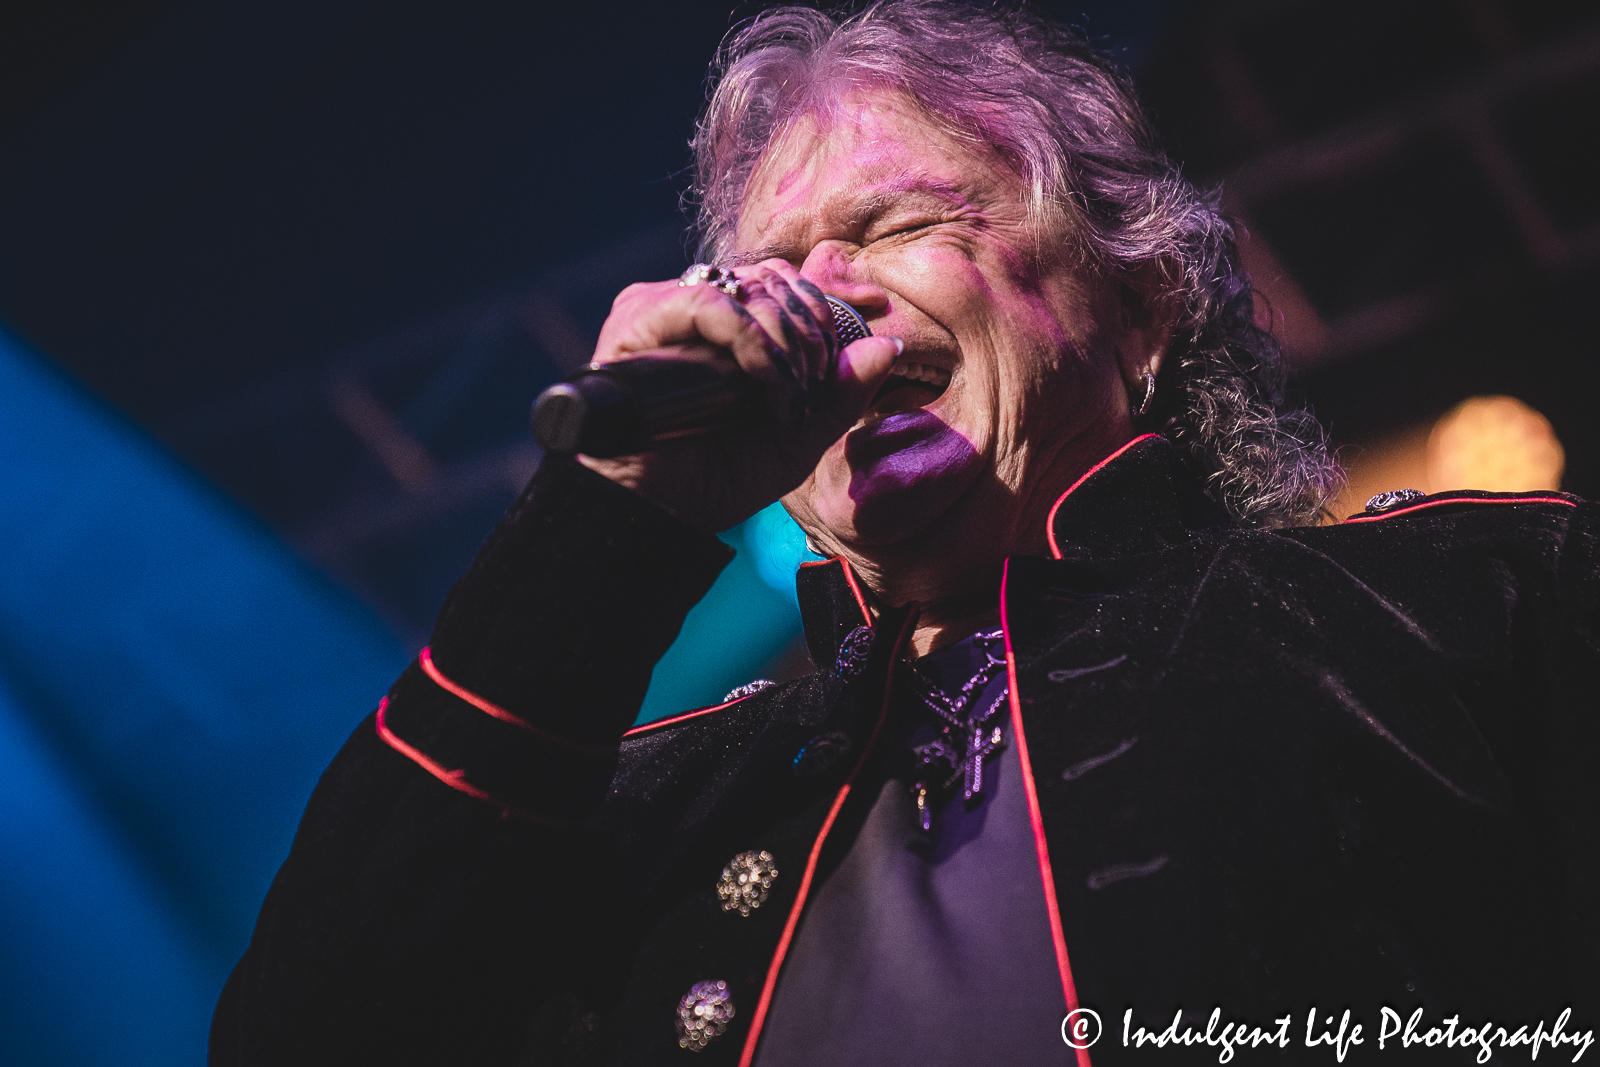 Lead singer Russell Hitchcock of soft rock duo Air Supply live in concert performing "Just as I Am" at Ameristar Casino's Star Pavilion in Kansas City, MO on May 5, 2023.